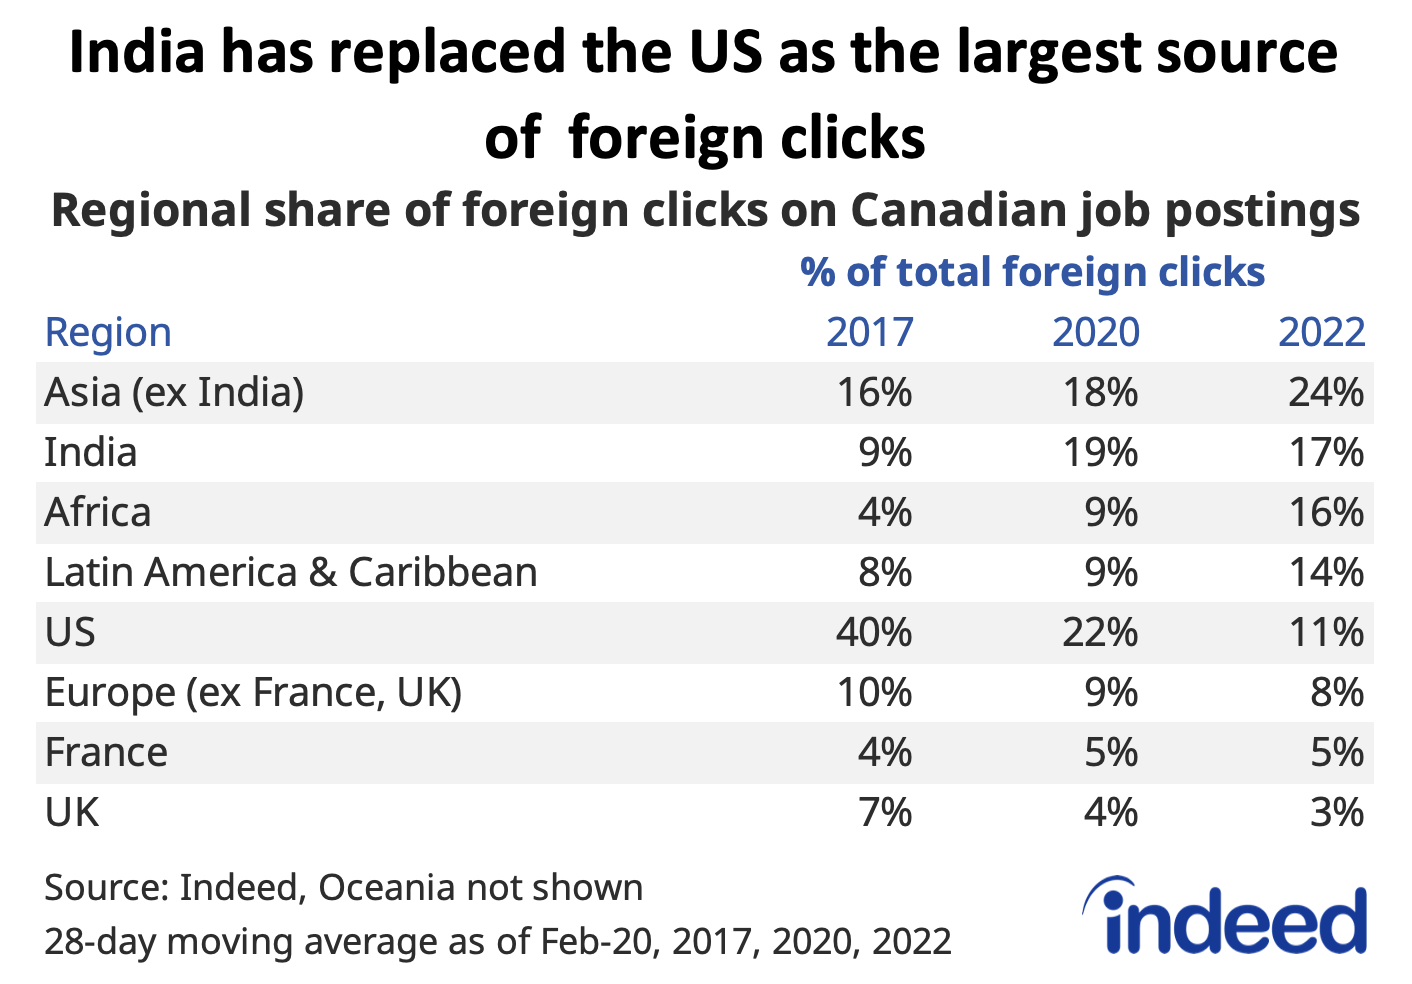 Table titled “India has replaced the US as the largest source of foreign clicks.”